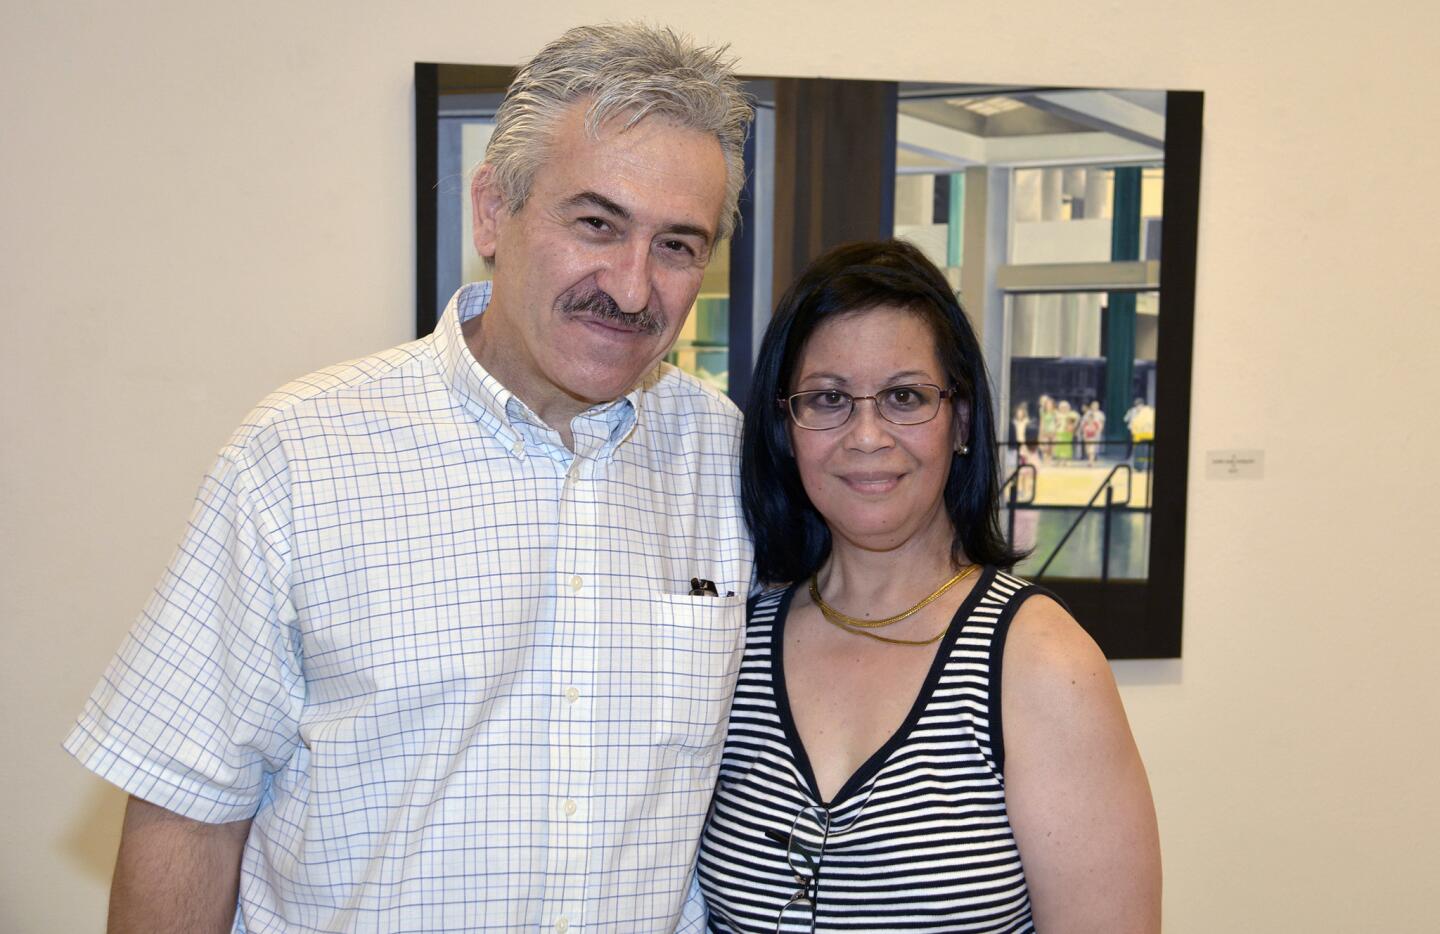 Artist Lynda A. N. Reyes and her husband Albert Natian arriving at the Lueke Creative Arts Center for Friday's opening reception.